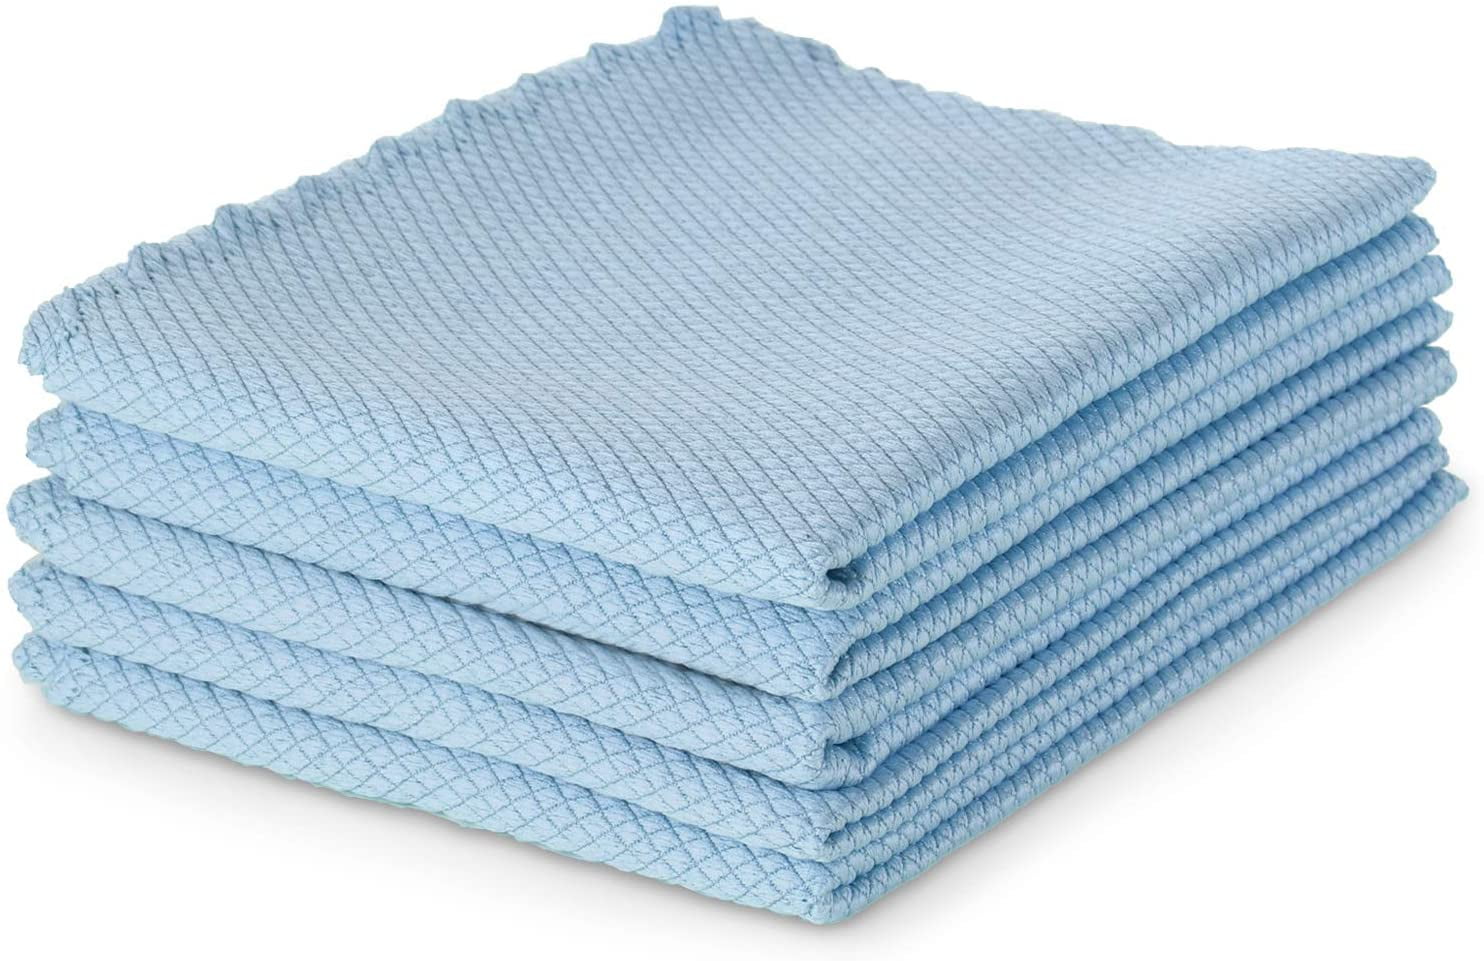 10Pcs Microfibre Easy Clean Nanoscale Cleaning Cloth 20 X 16 Bathroom Multi-Purpose Stainless Steel Polishing Towel Lint Free Fish Scale Wipes for Glass Screens Cars Window